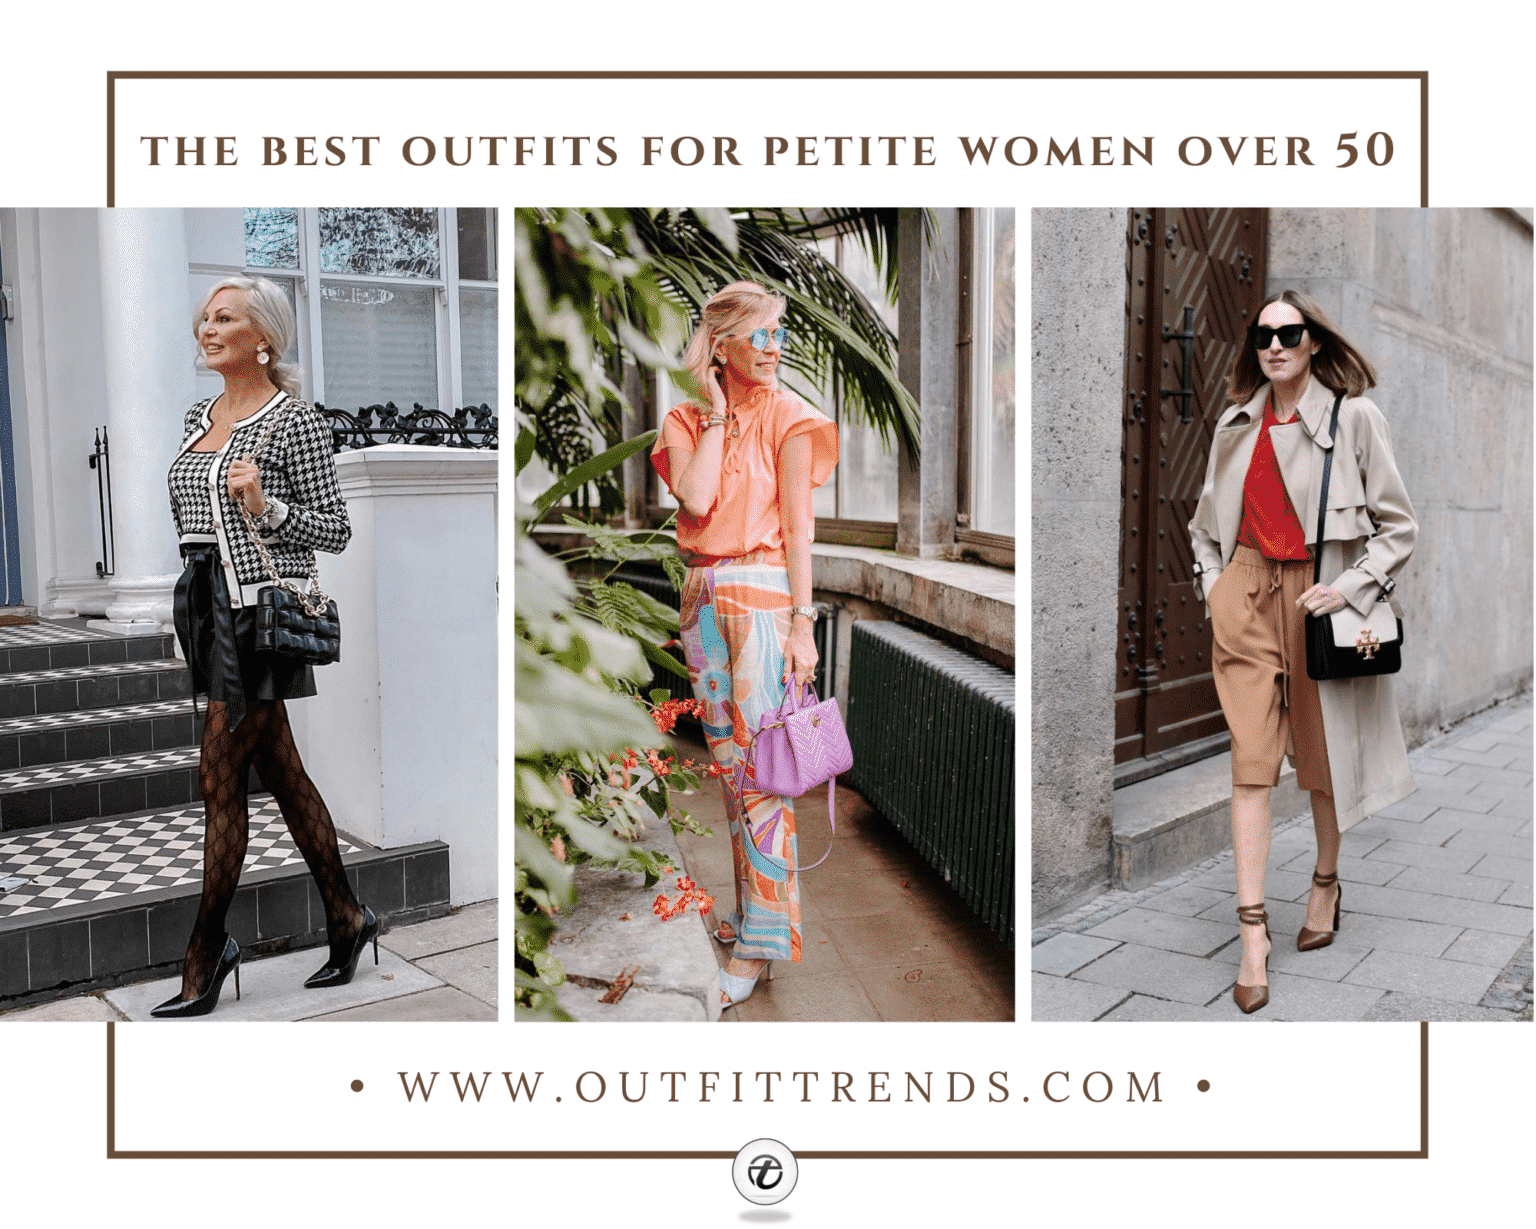 4 Best Outfits for Petite Women Over 50 to Wear This Year